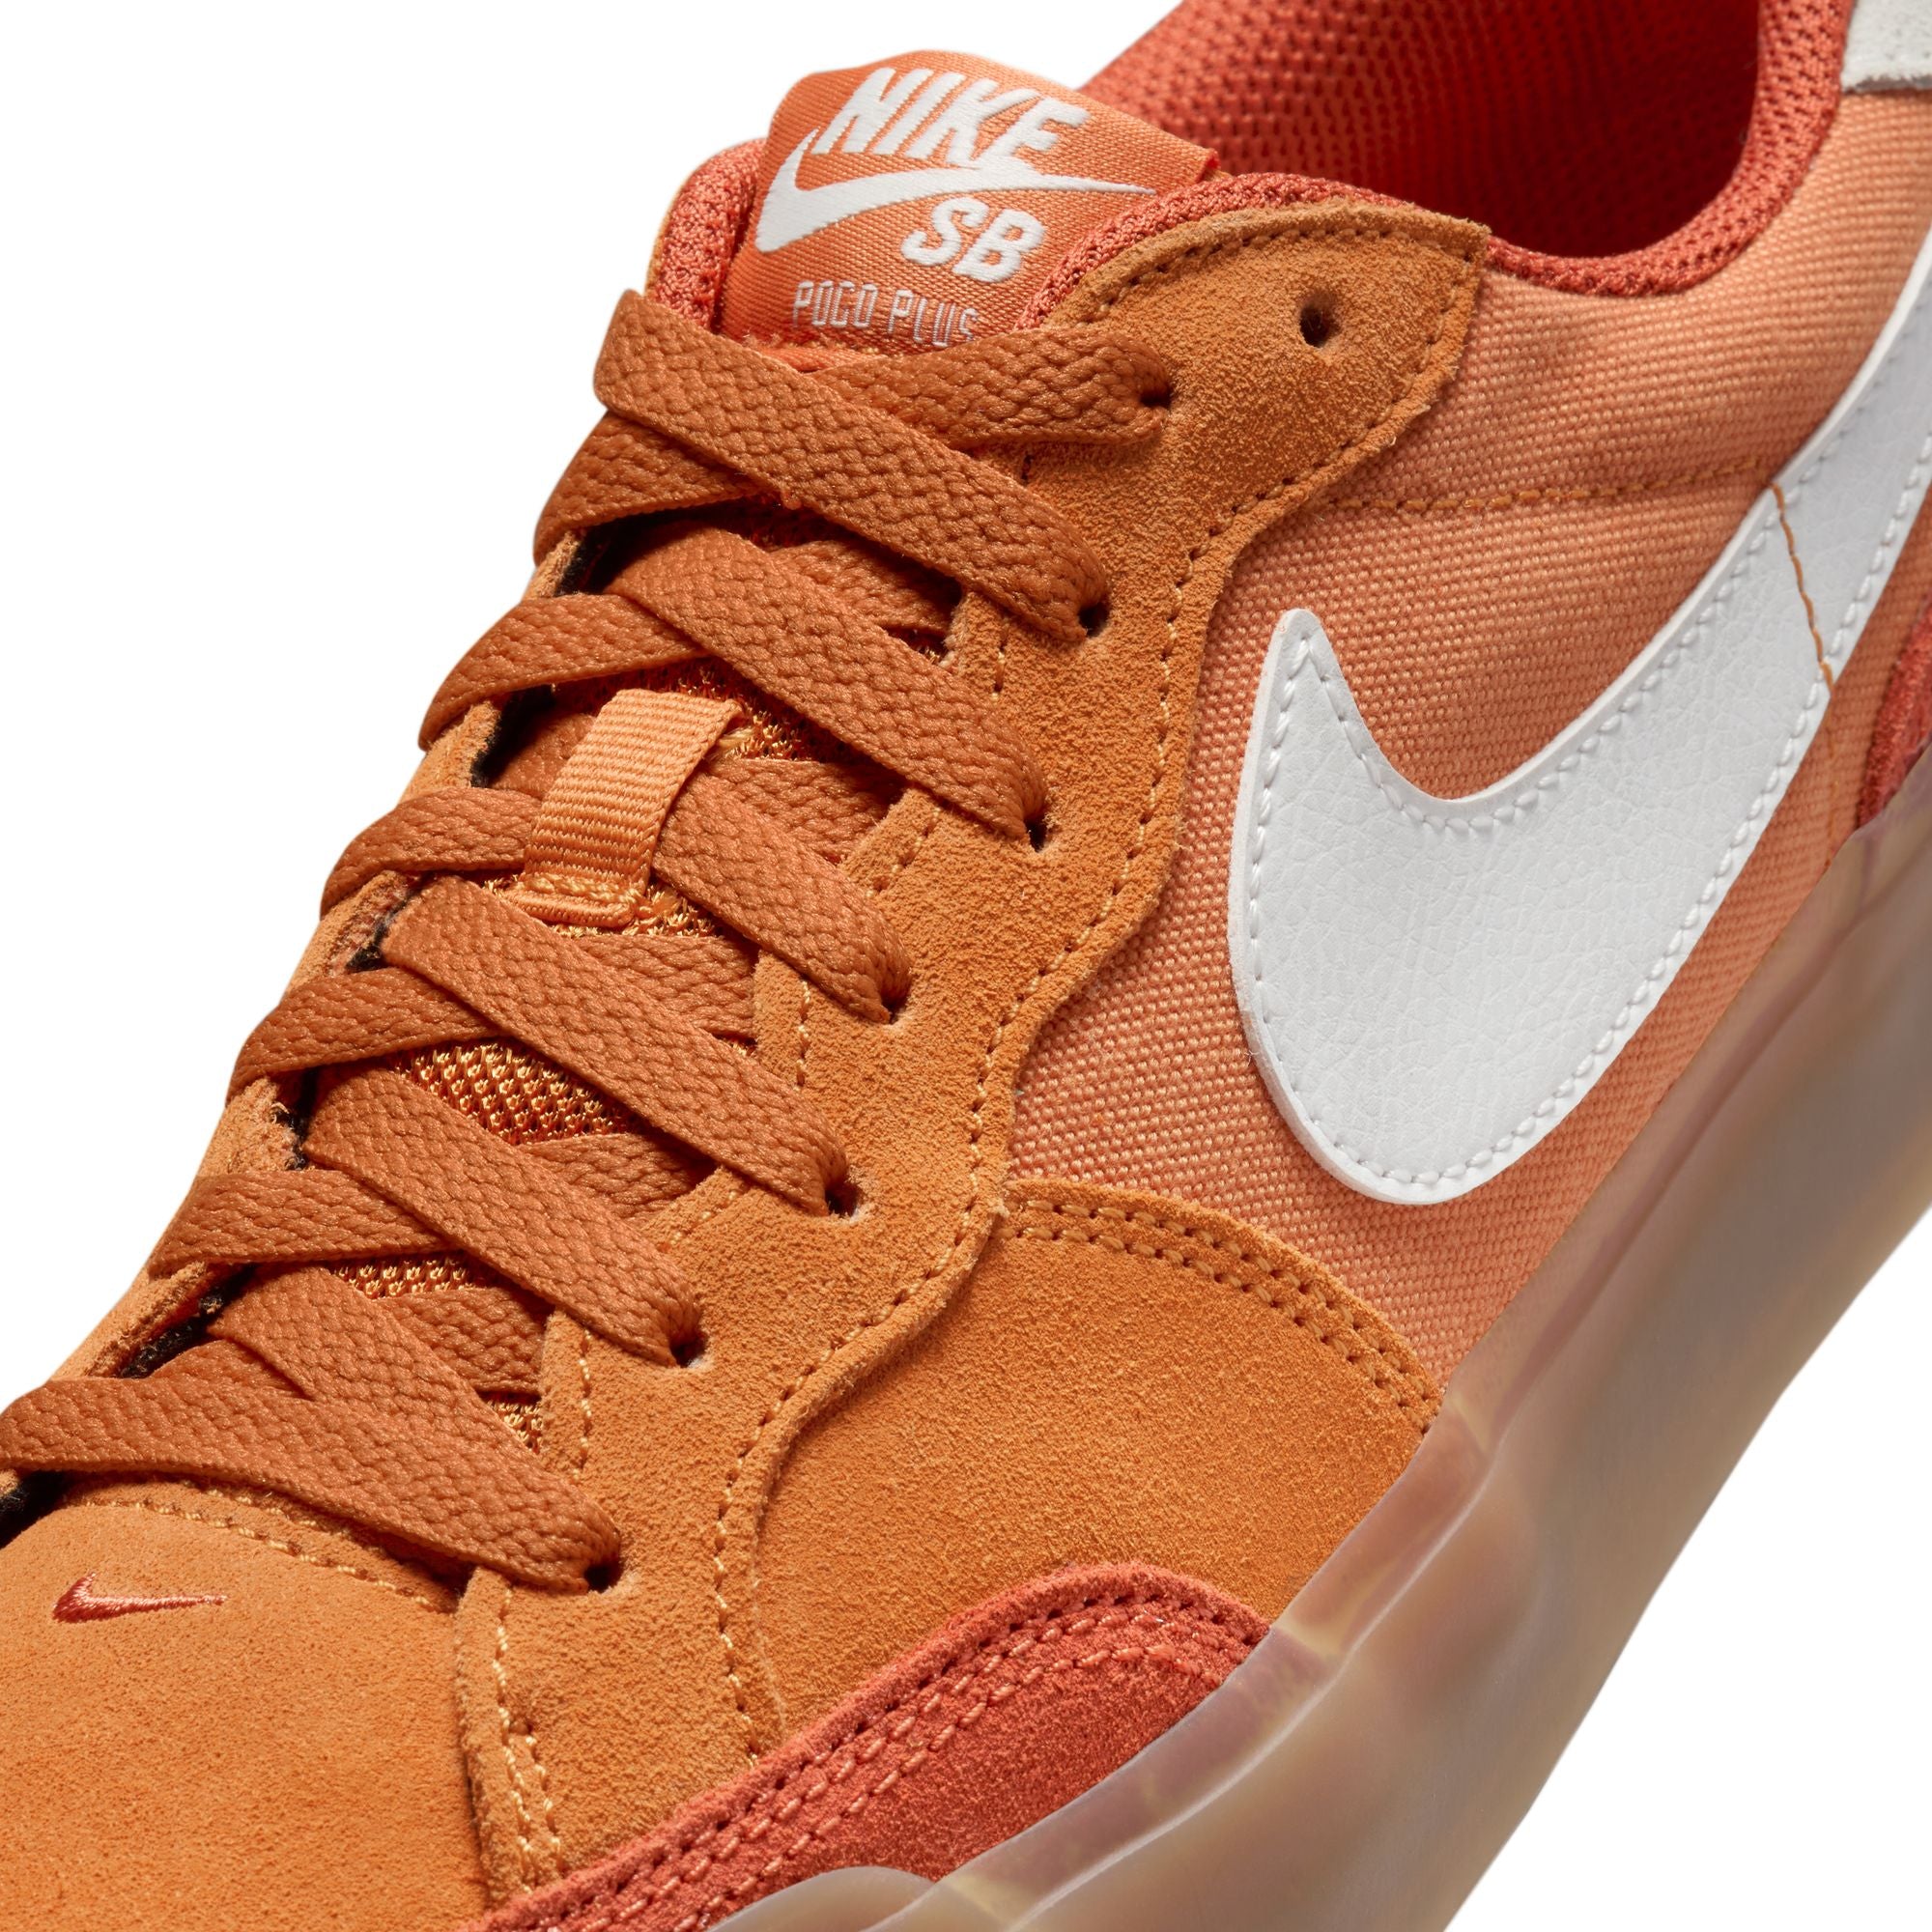 Low top Nike SB Pogo Plus skate shoe in monarch orange colour, with a gum sole and white nike swoosh on sides.